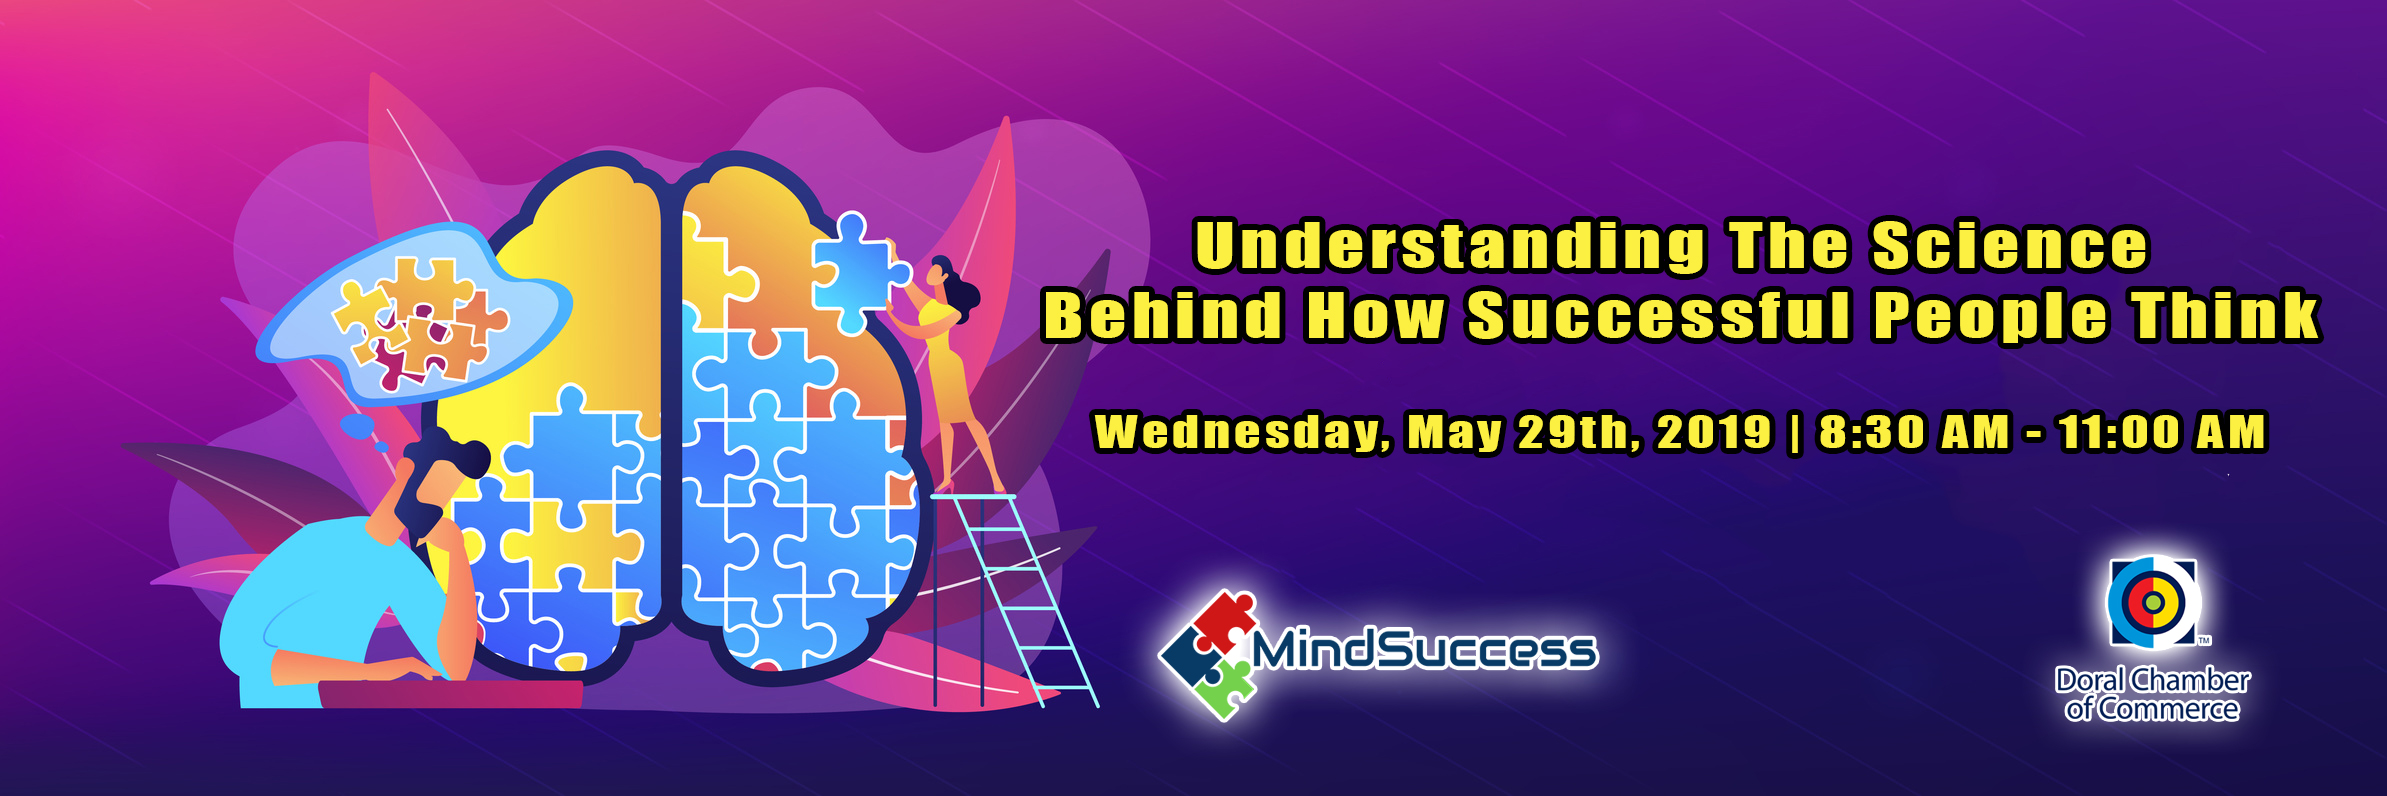 Understanding The Science Behind How Successful People Think, Miami-Dade, Florida, United States